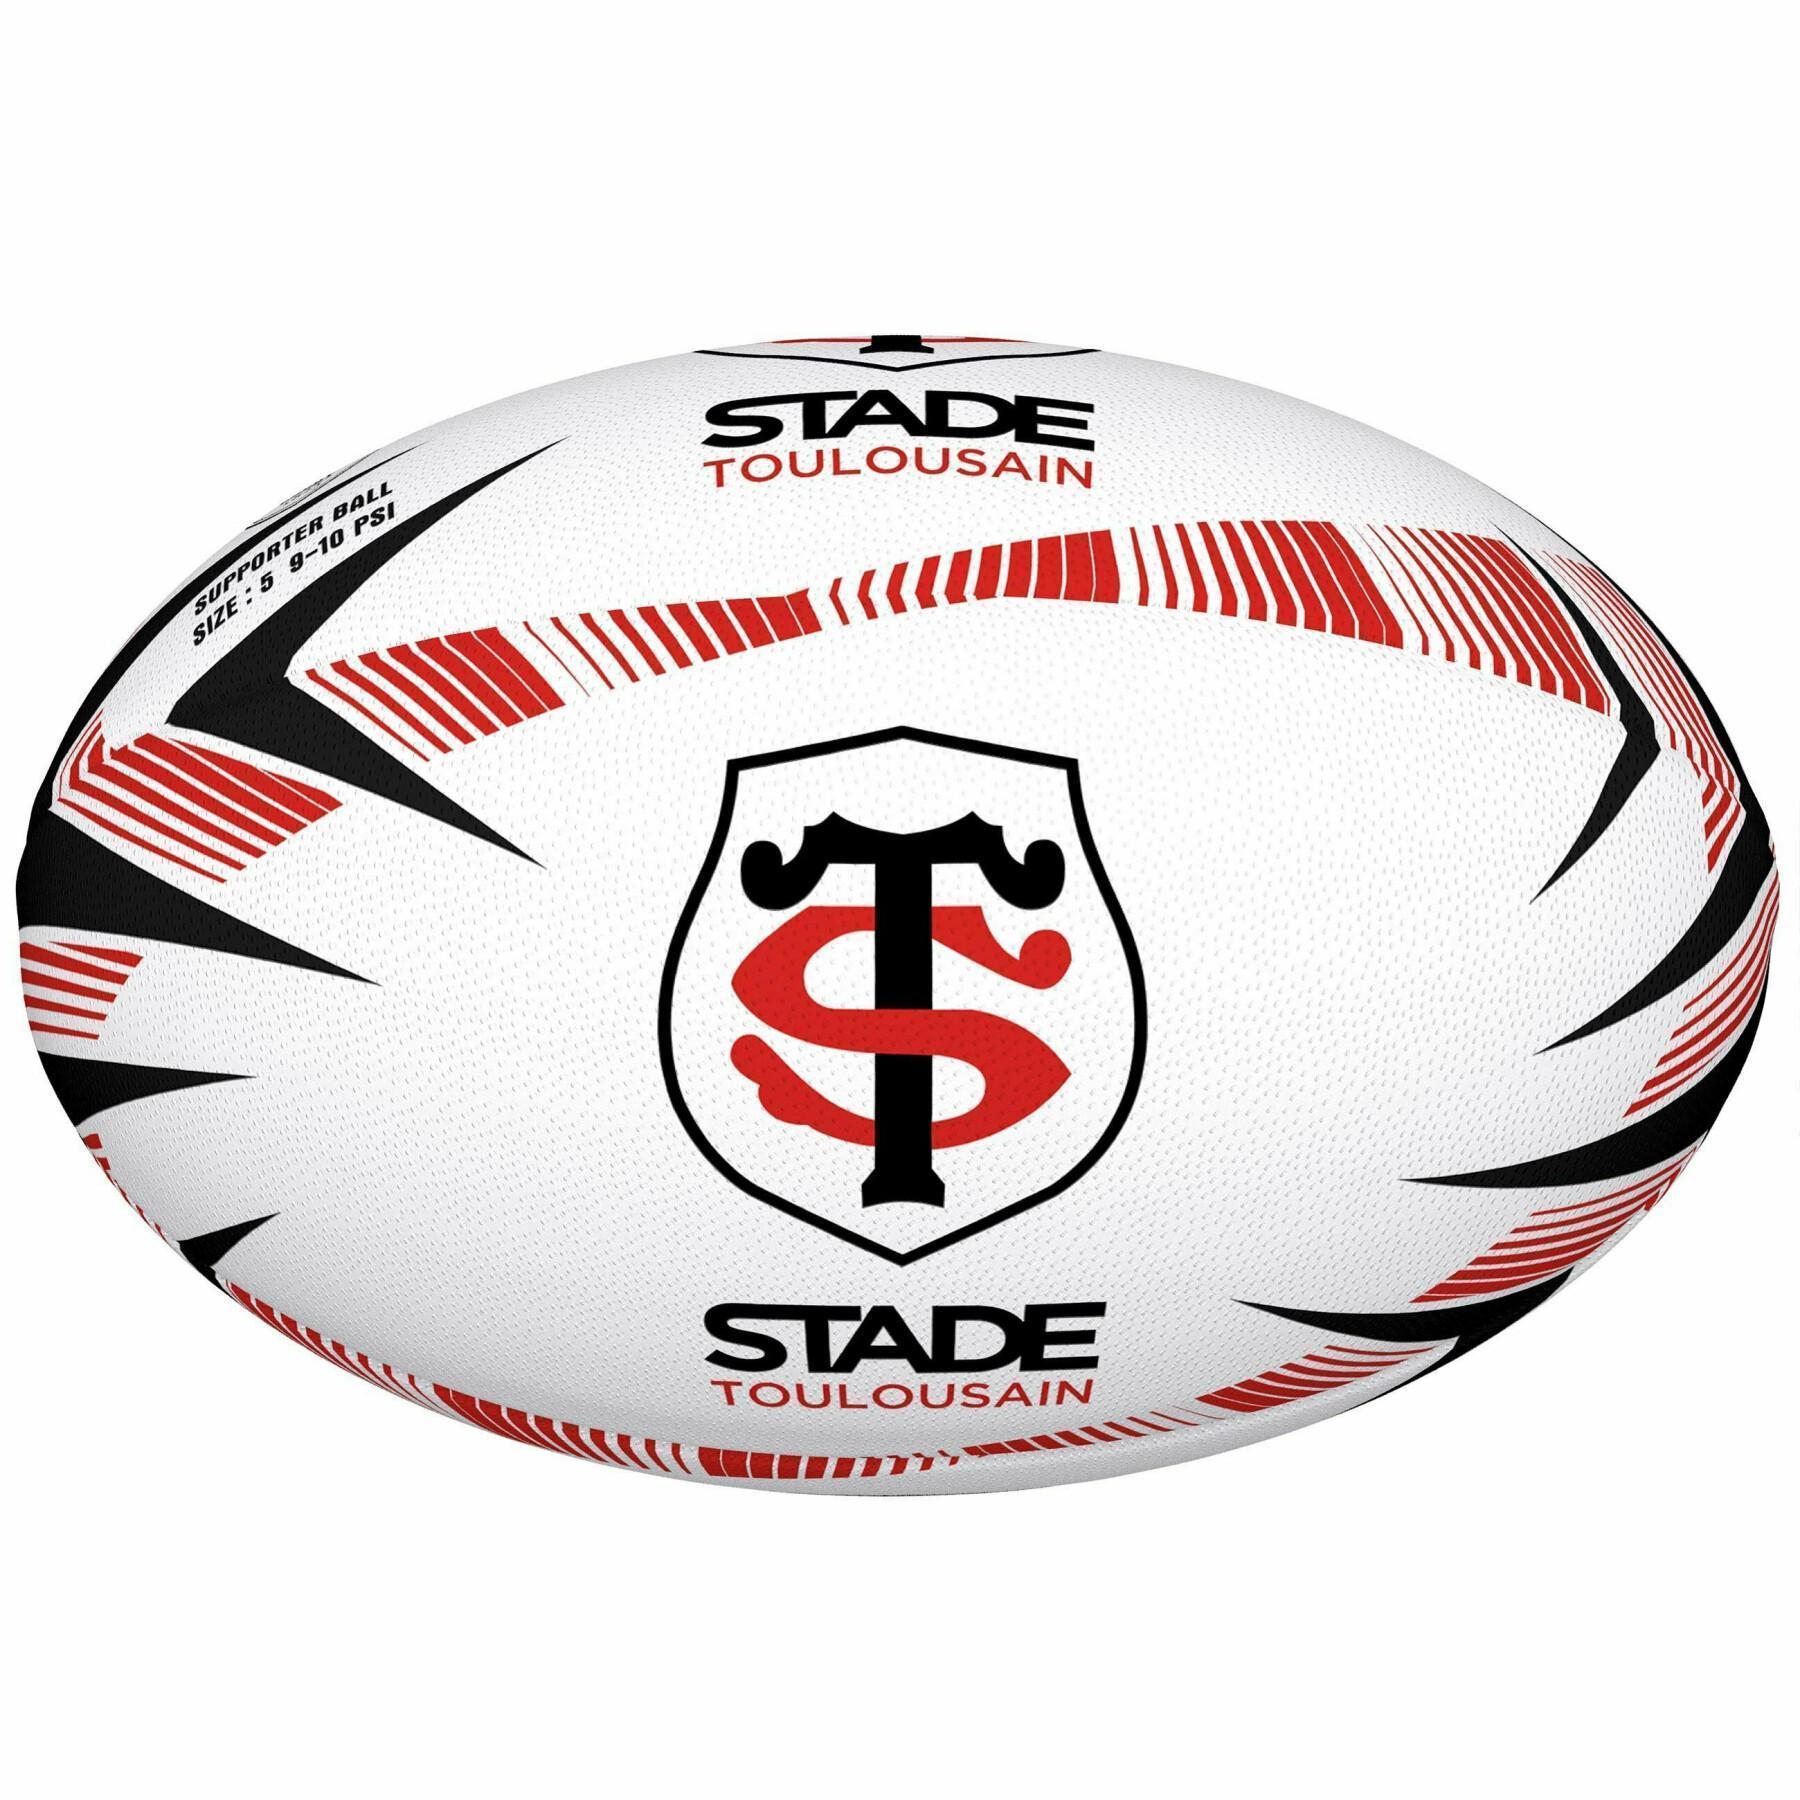 Rugbyball Stade Toulousain 2021/22